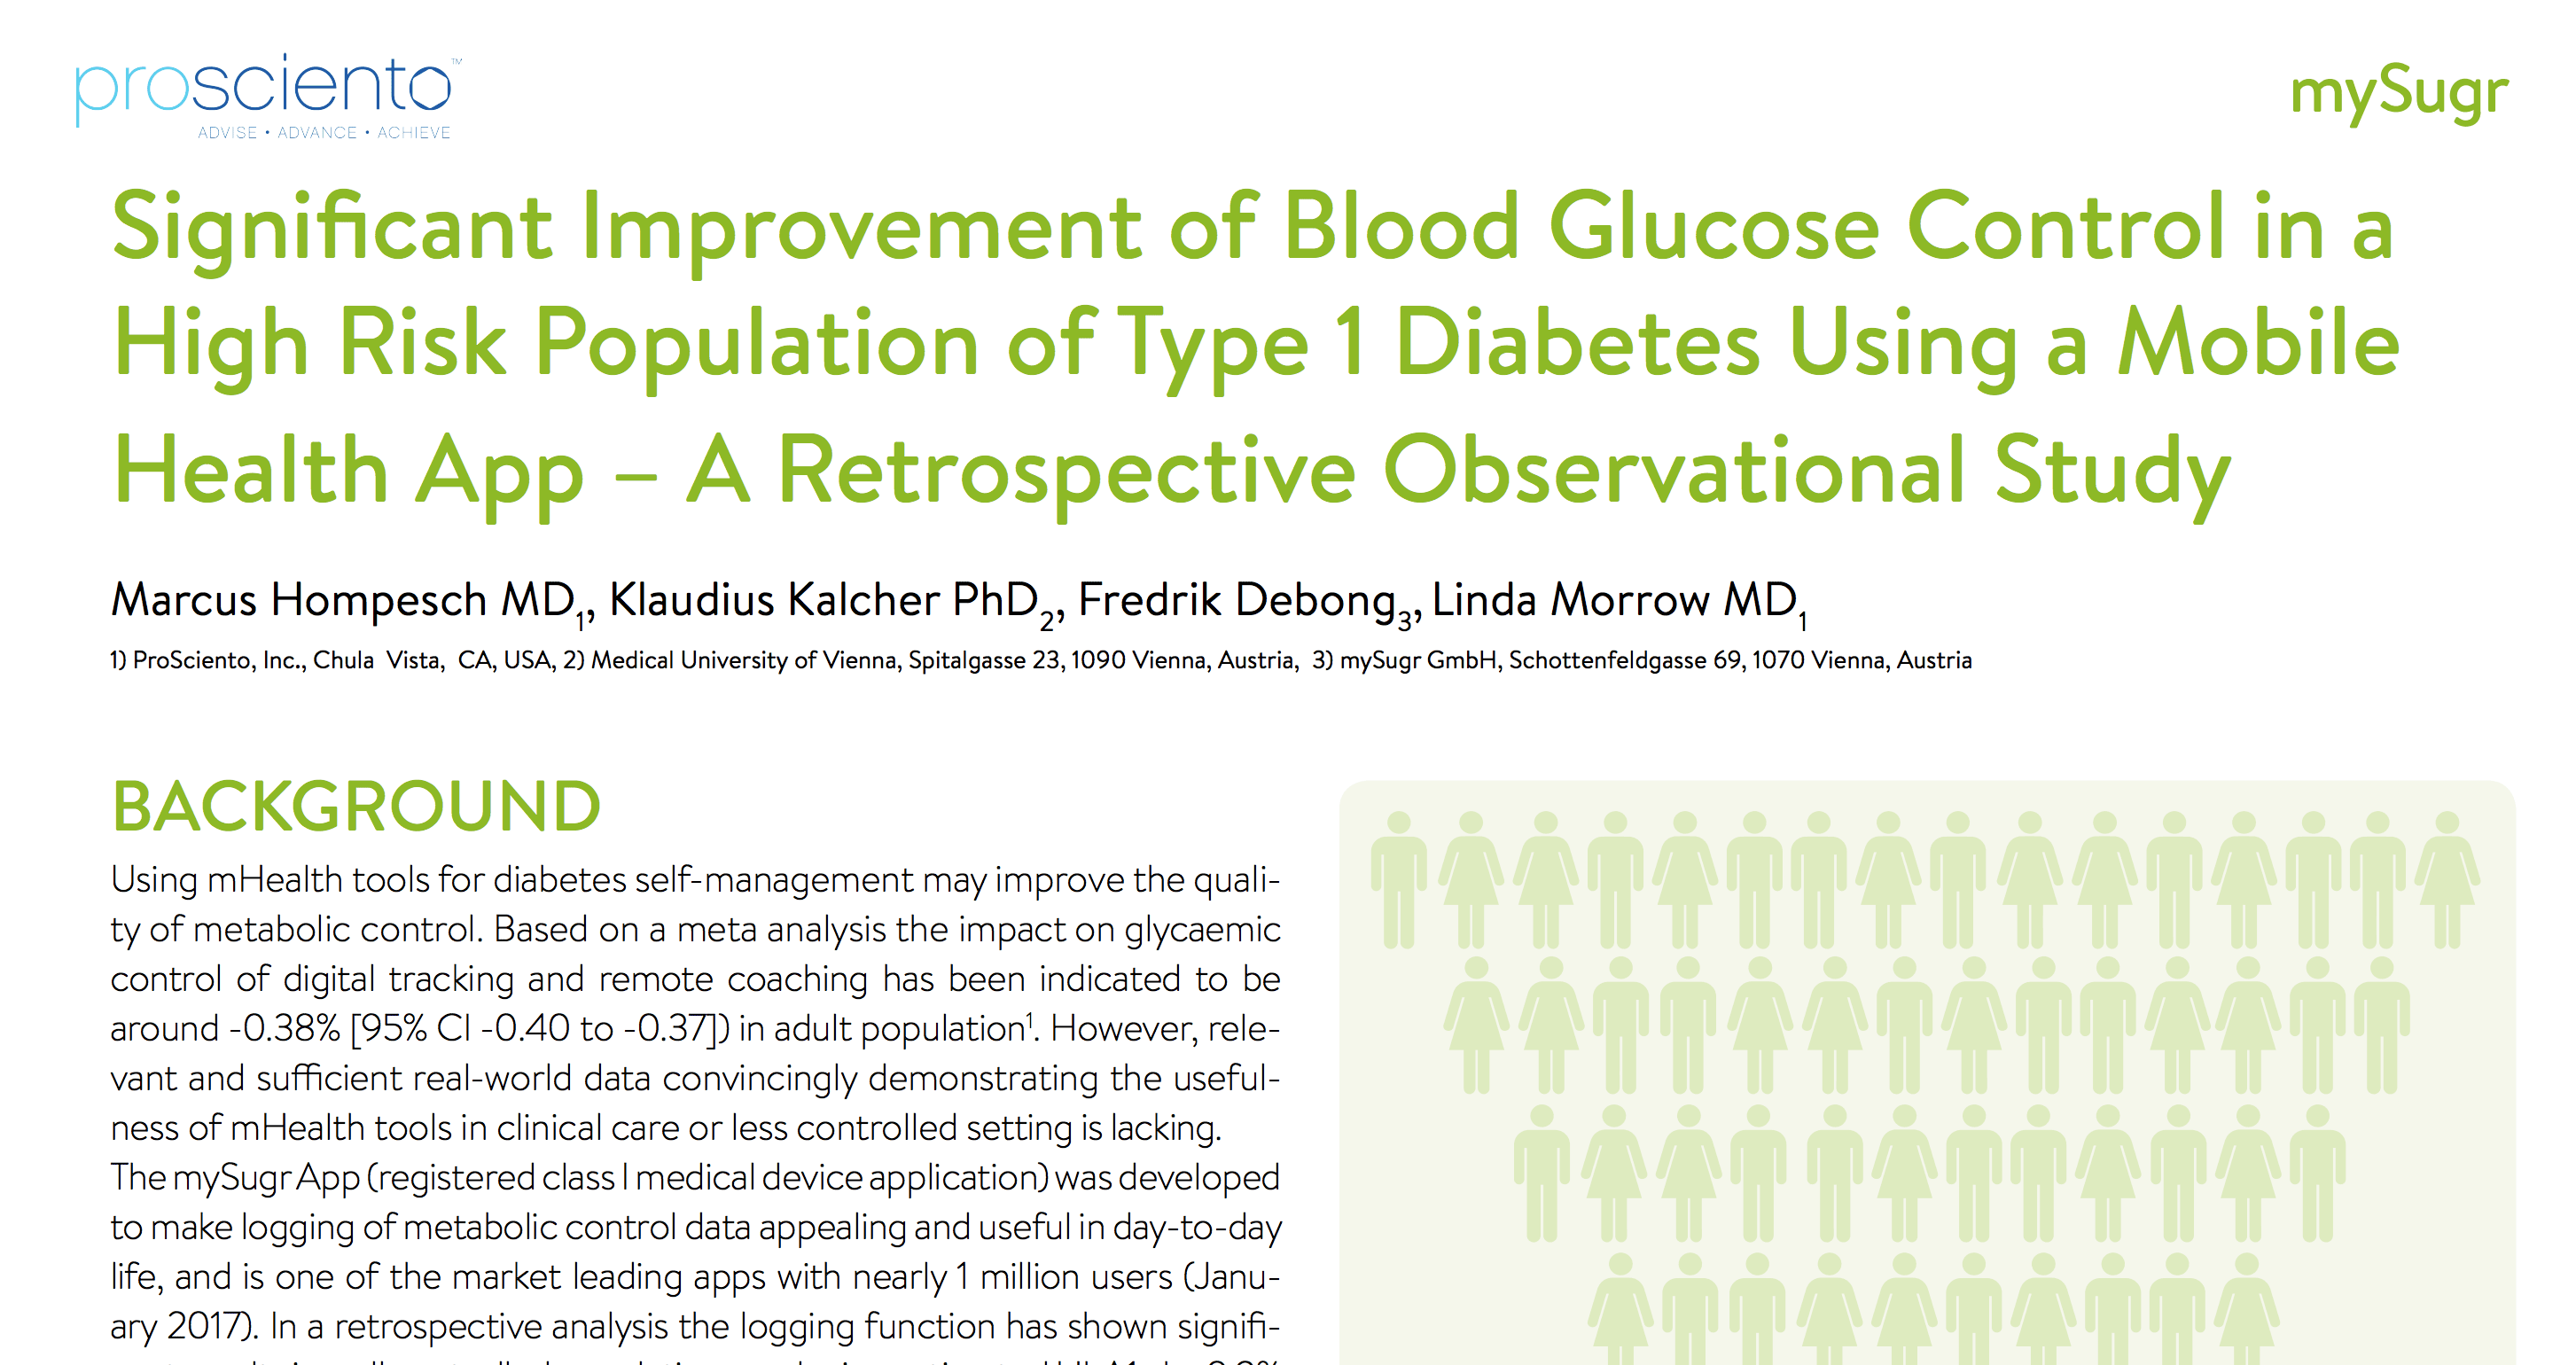 image of Significant improvement of blood glucose control in a high-risk population of type 1 diabetes using a mobile health app – a retrospective observational study.